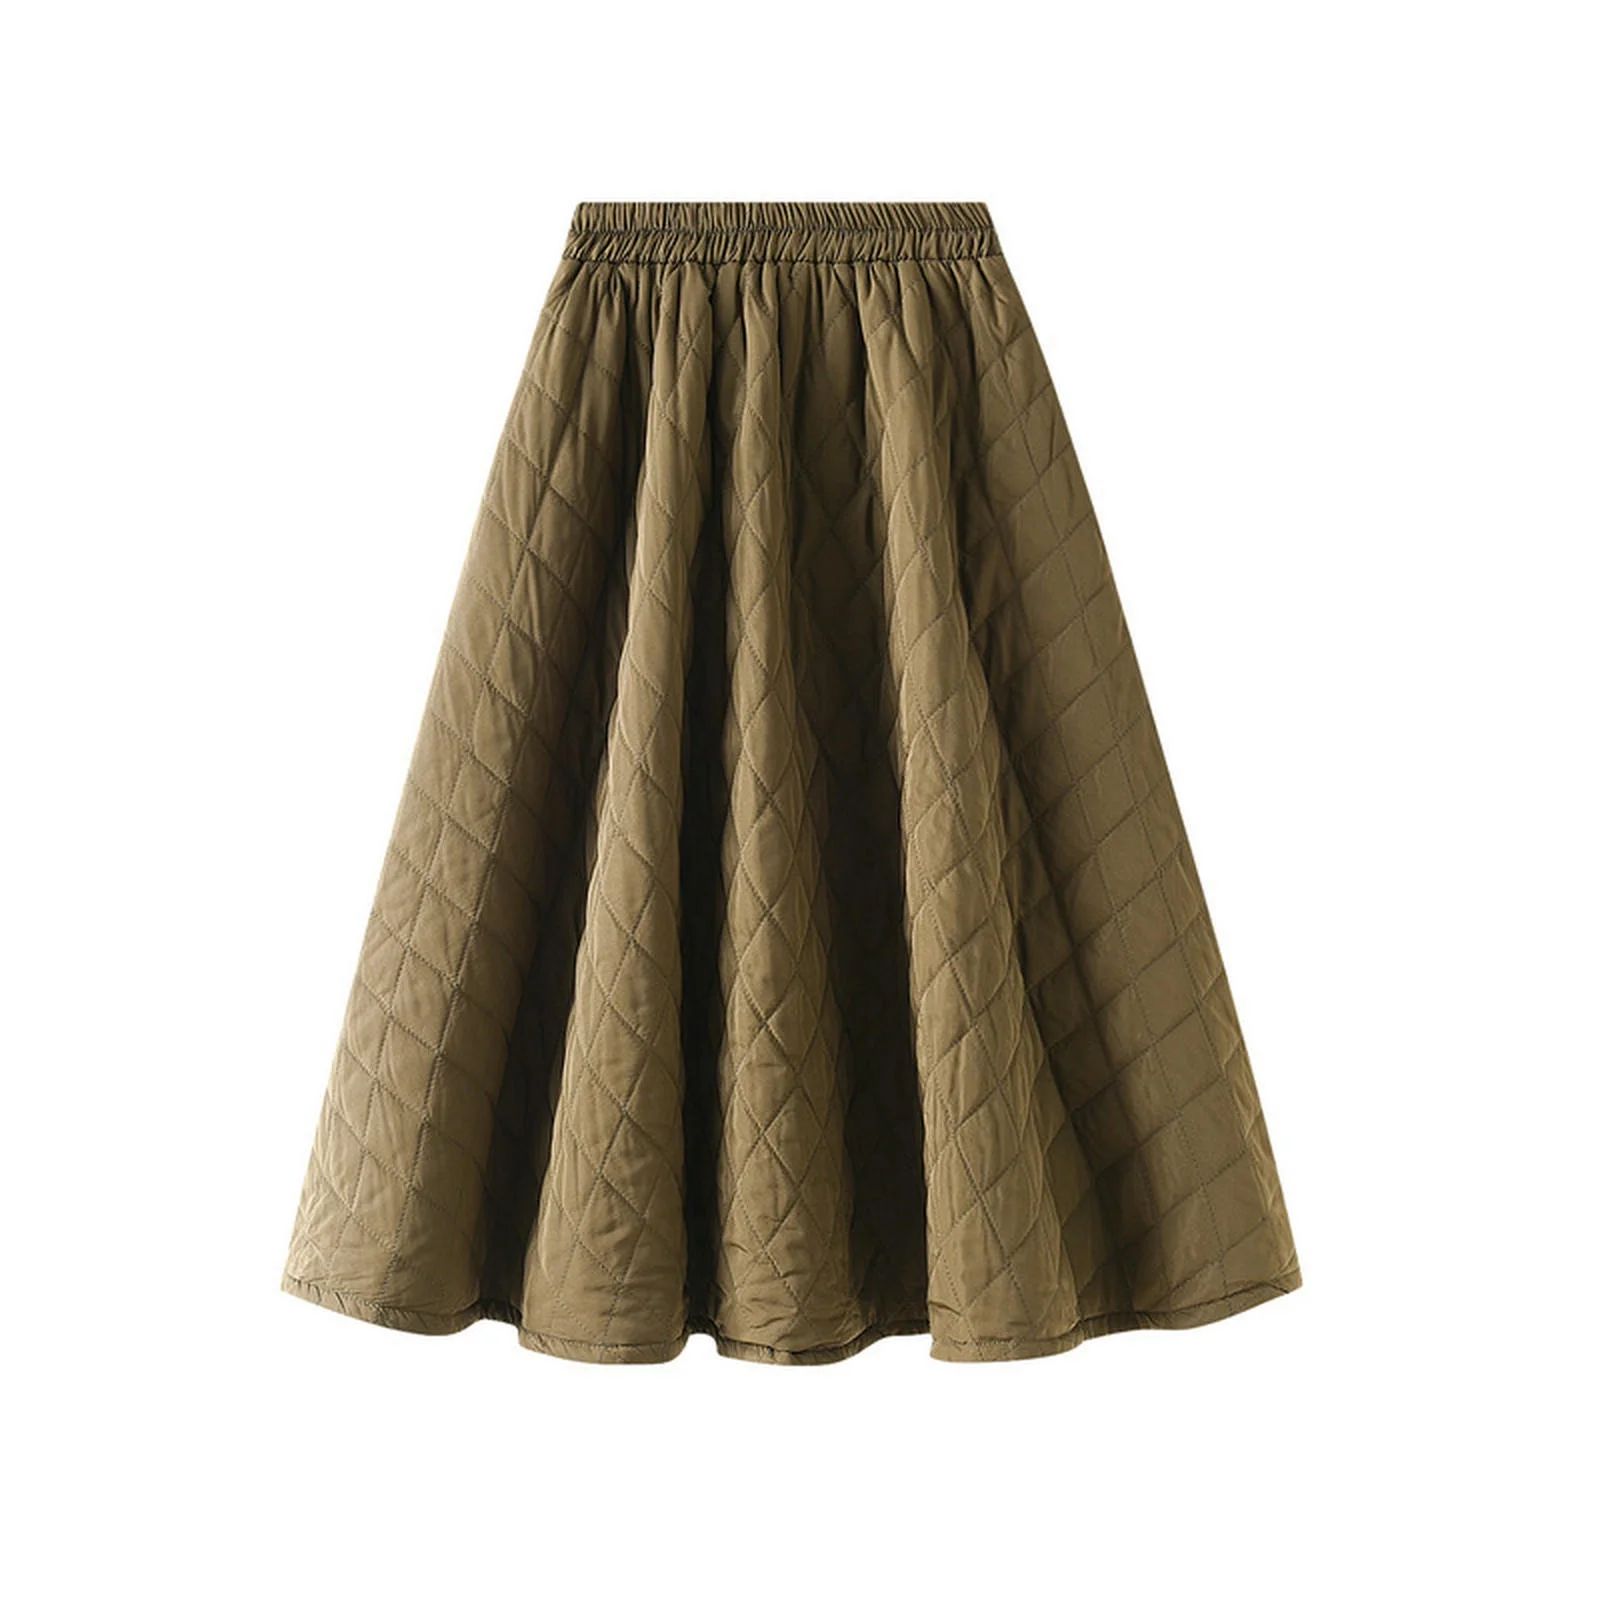 Autumn new elastic waist rhombus woven quilted A-line slimming skirt-olive green-one size | Walmart (US)